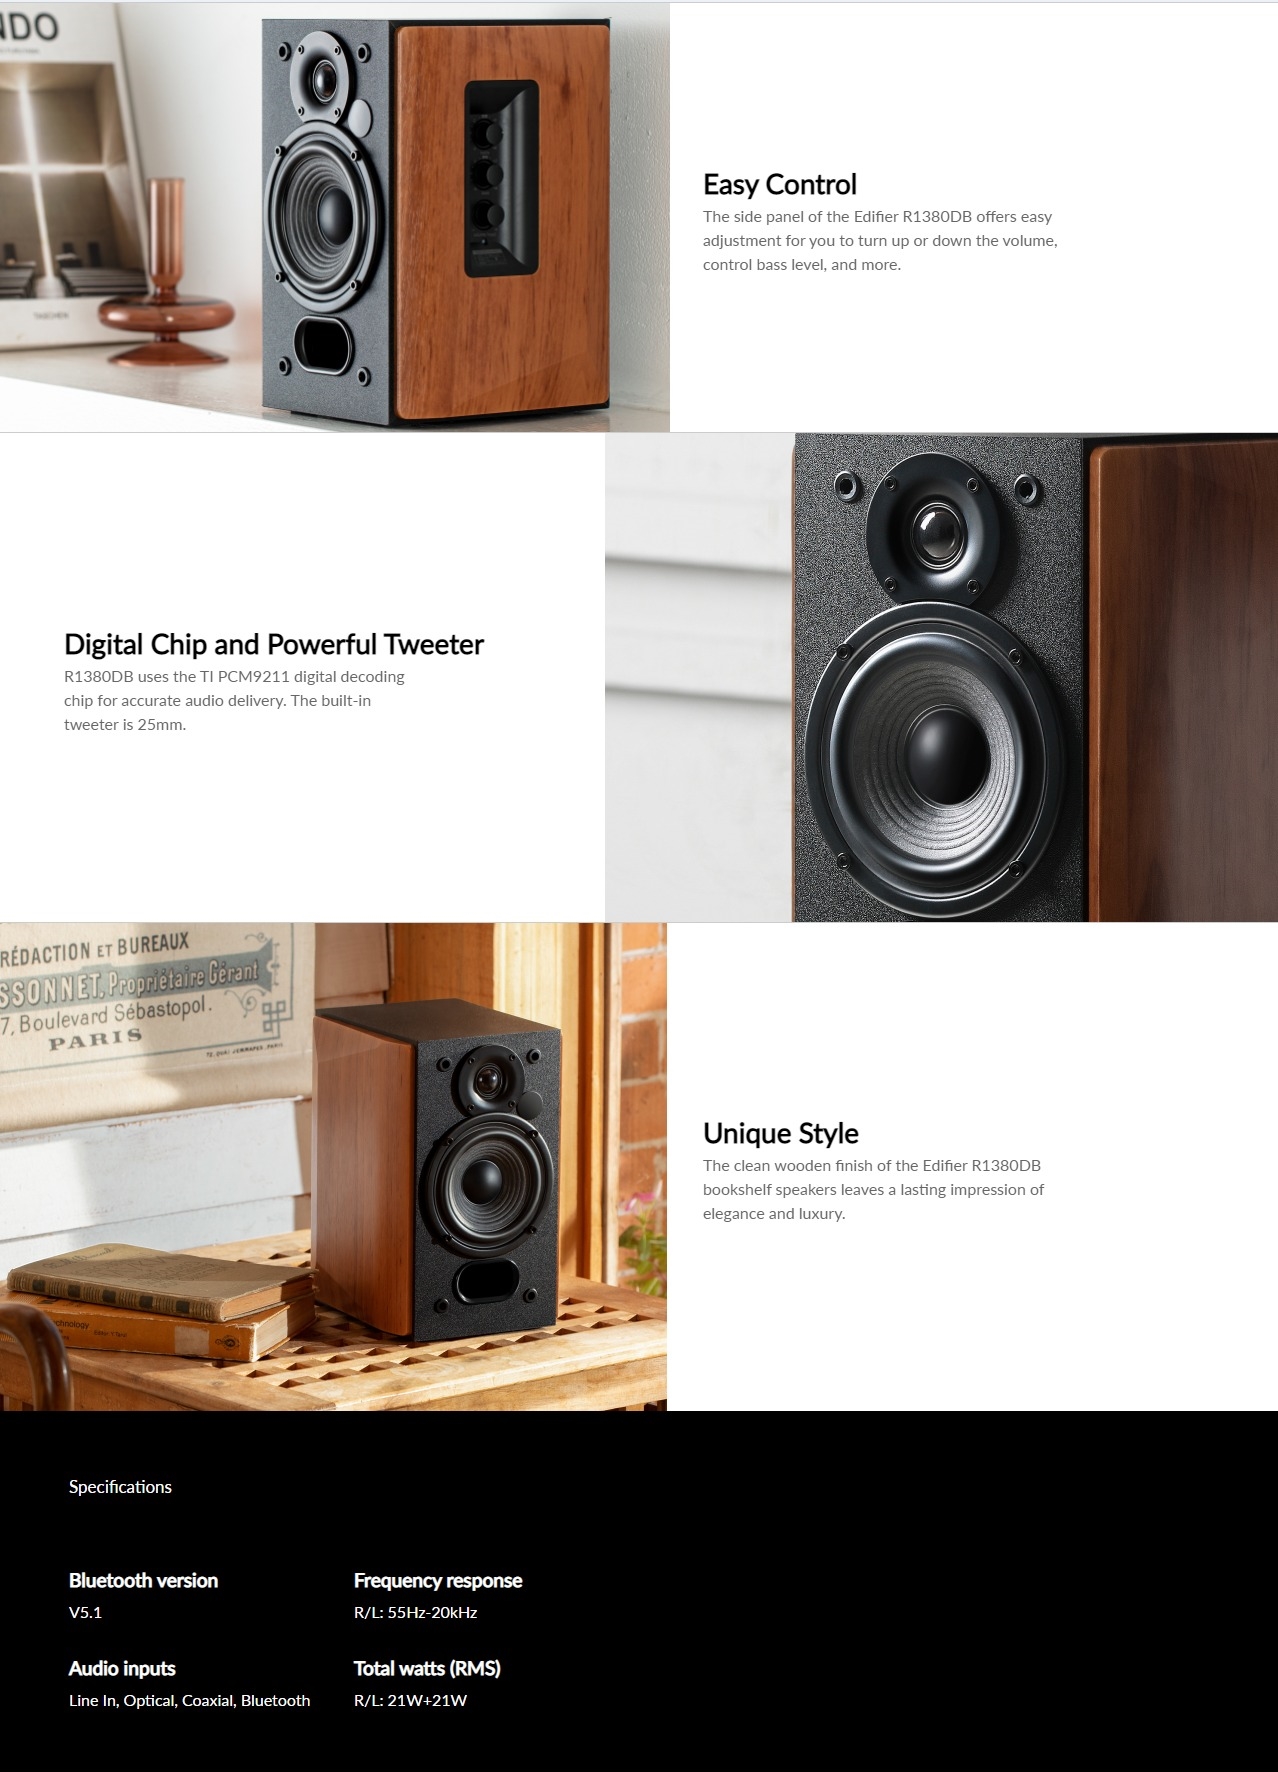 A large marketing image providing additional information about the product Edifier R1380DB 2.0 Professional Bluetooth Bookshelf Speakers - Additional alt info not provided